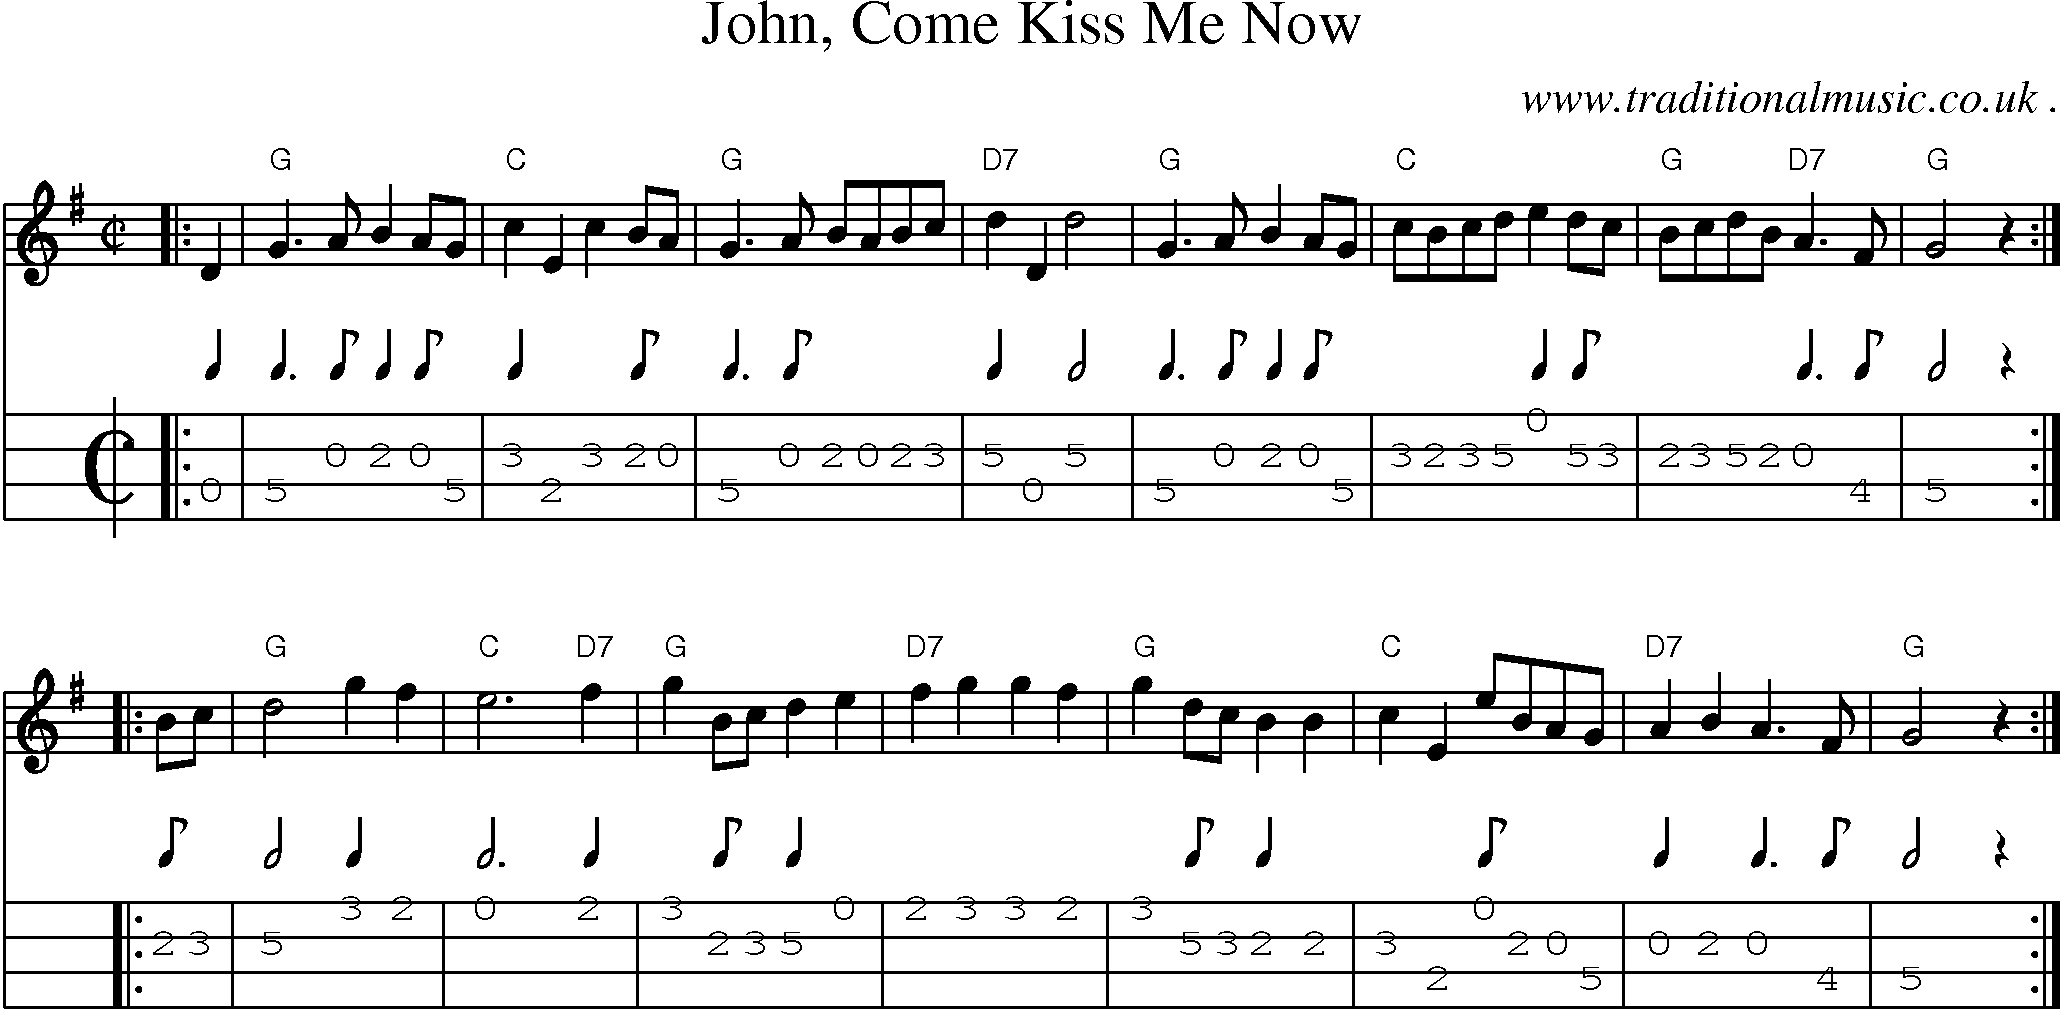 Sheet-music  score, Chords and Mandolin Tabs for John Come Kiss Me Now